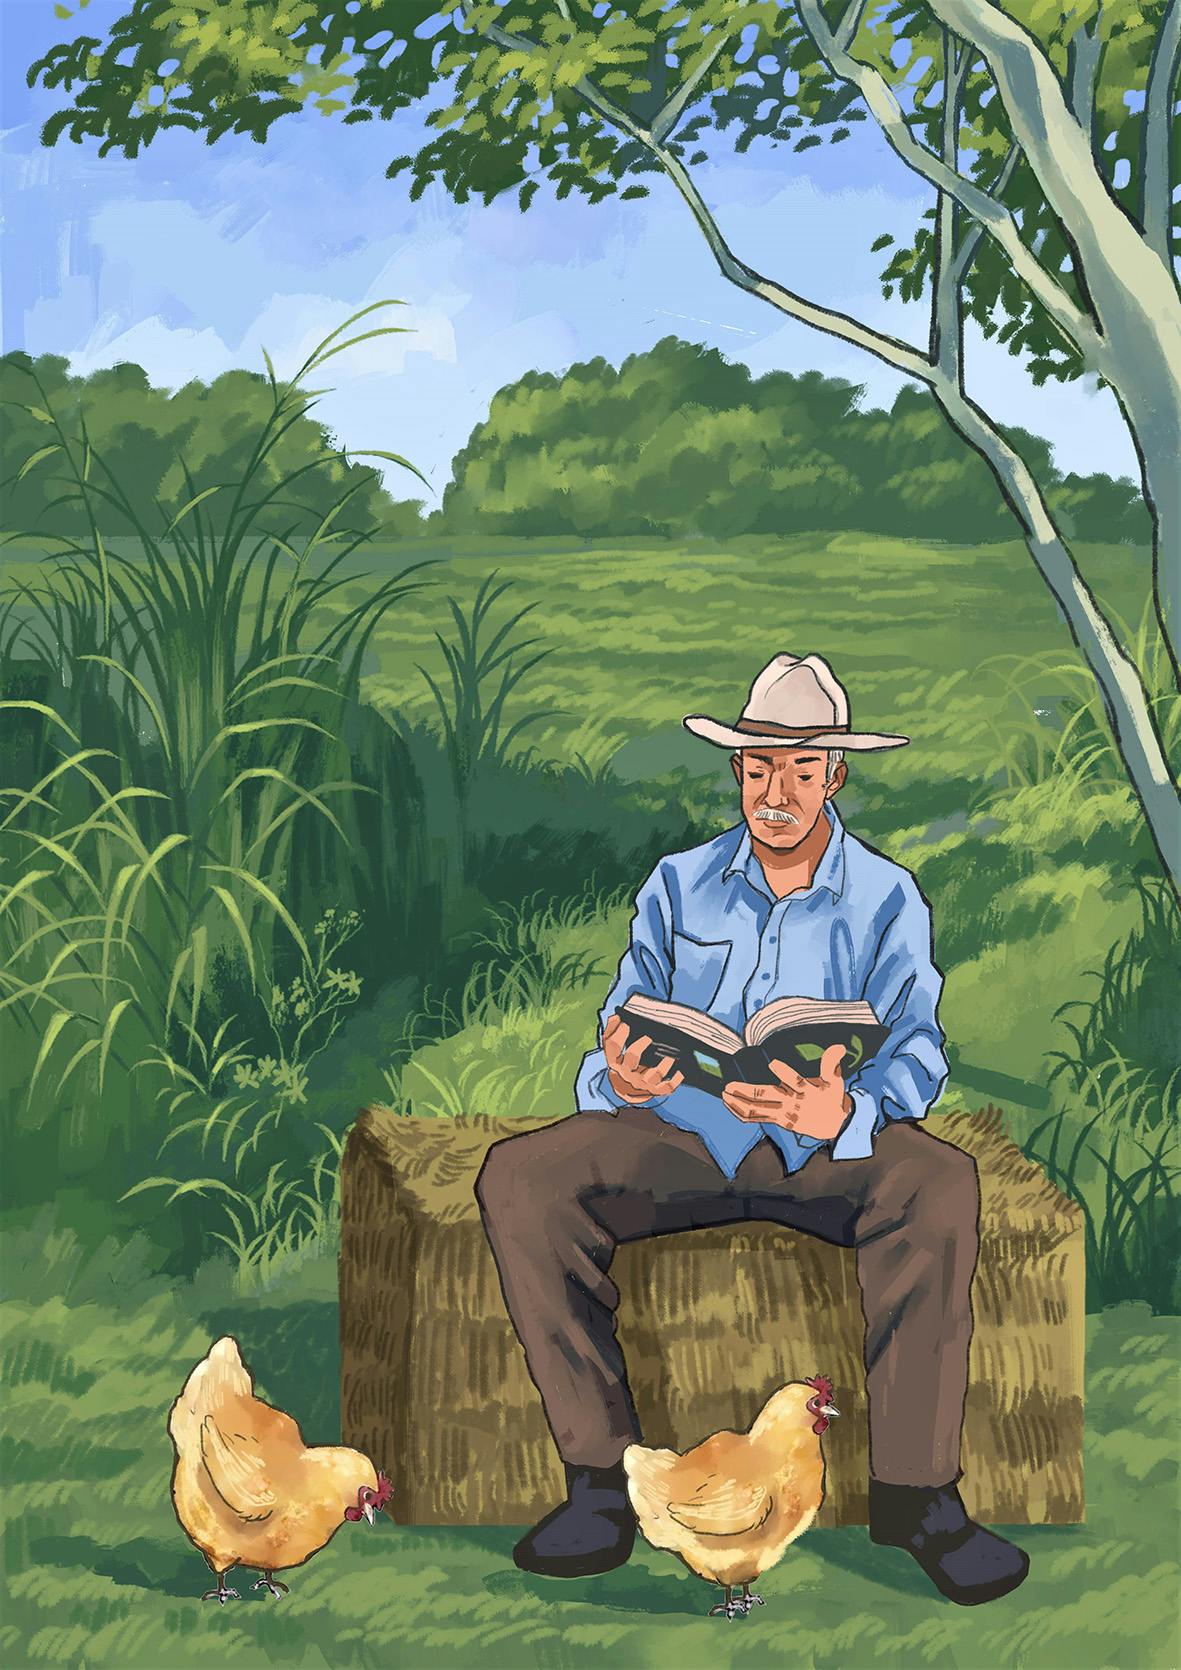 Farmer sitting on hay with chickens